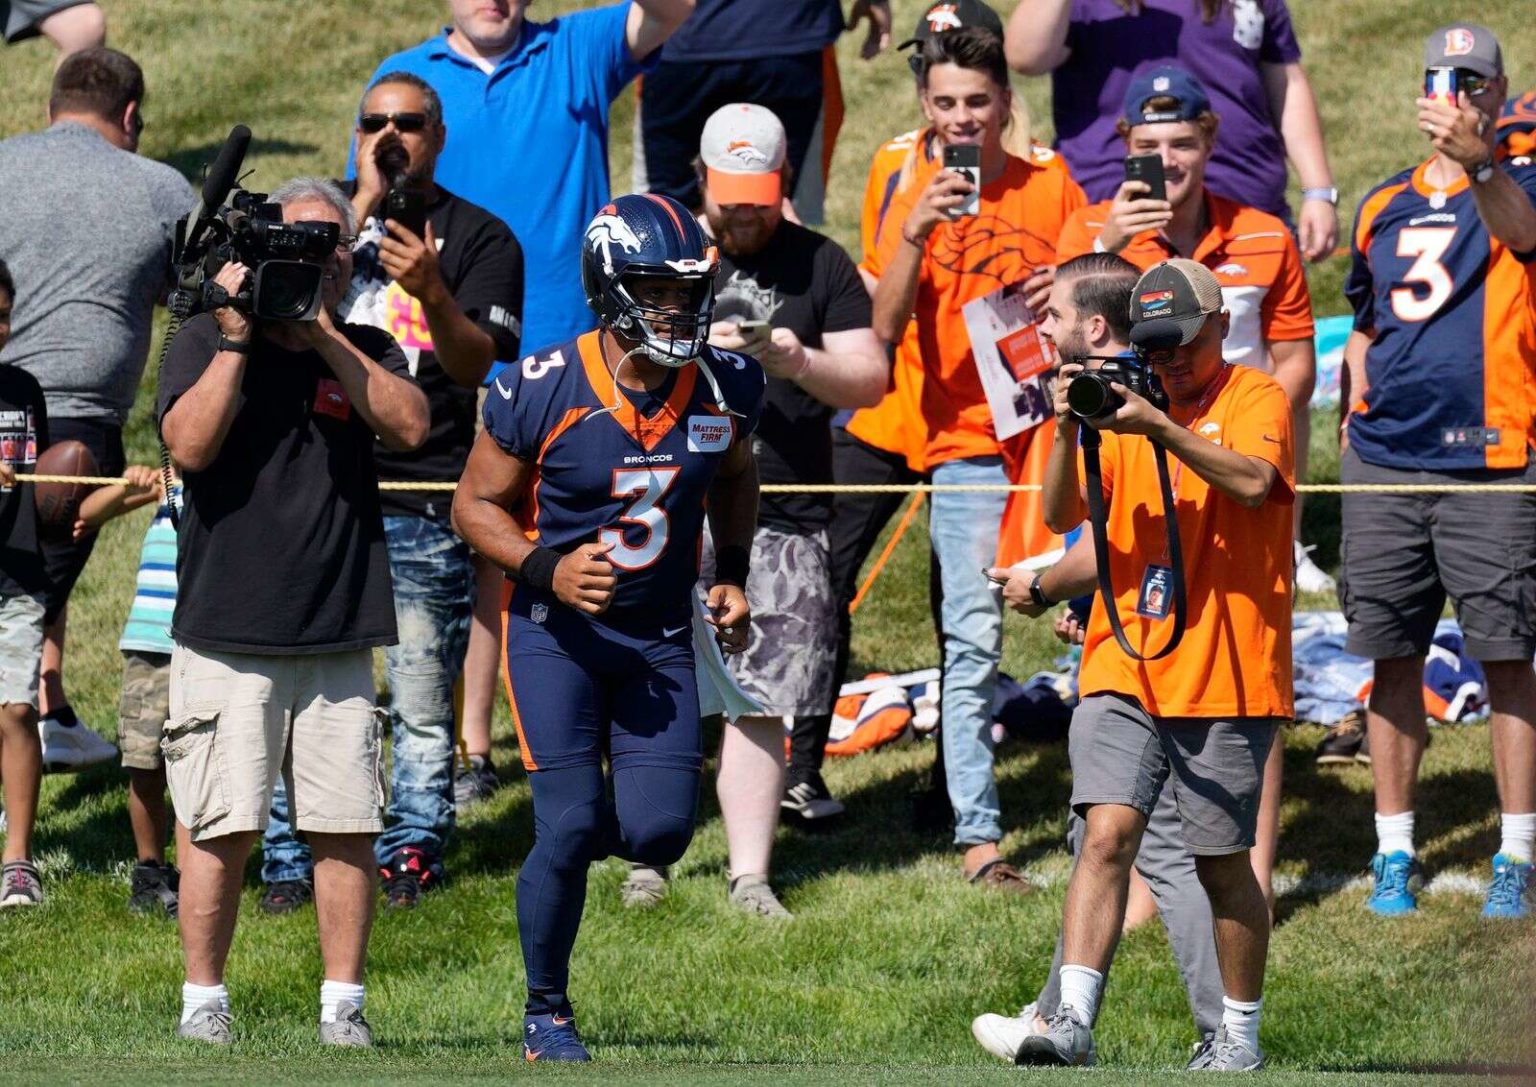 This Stat About The Denver Broncos Training Camp How Insanely Popular